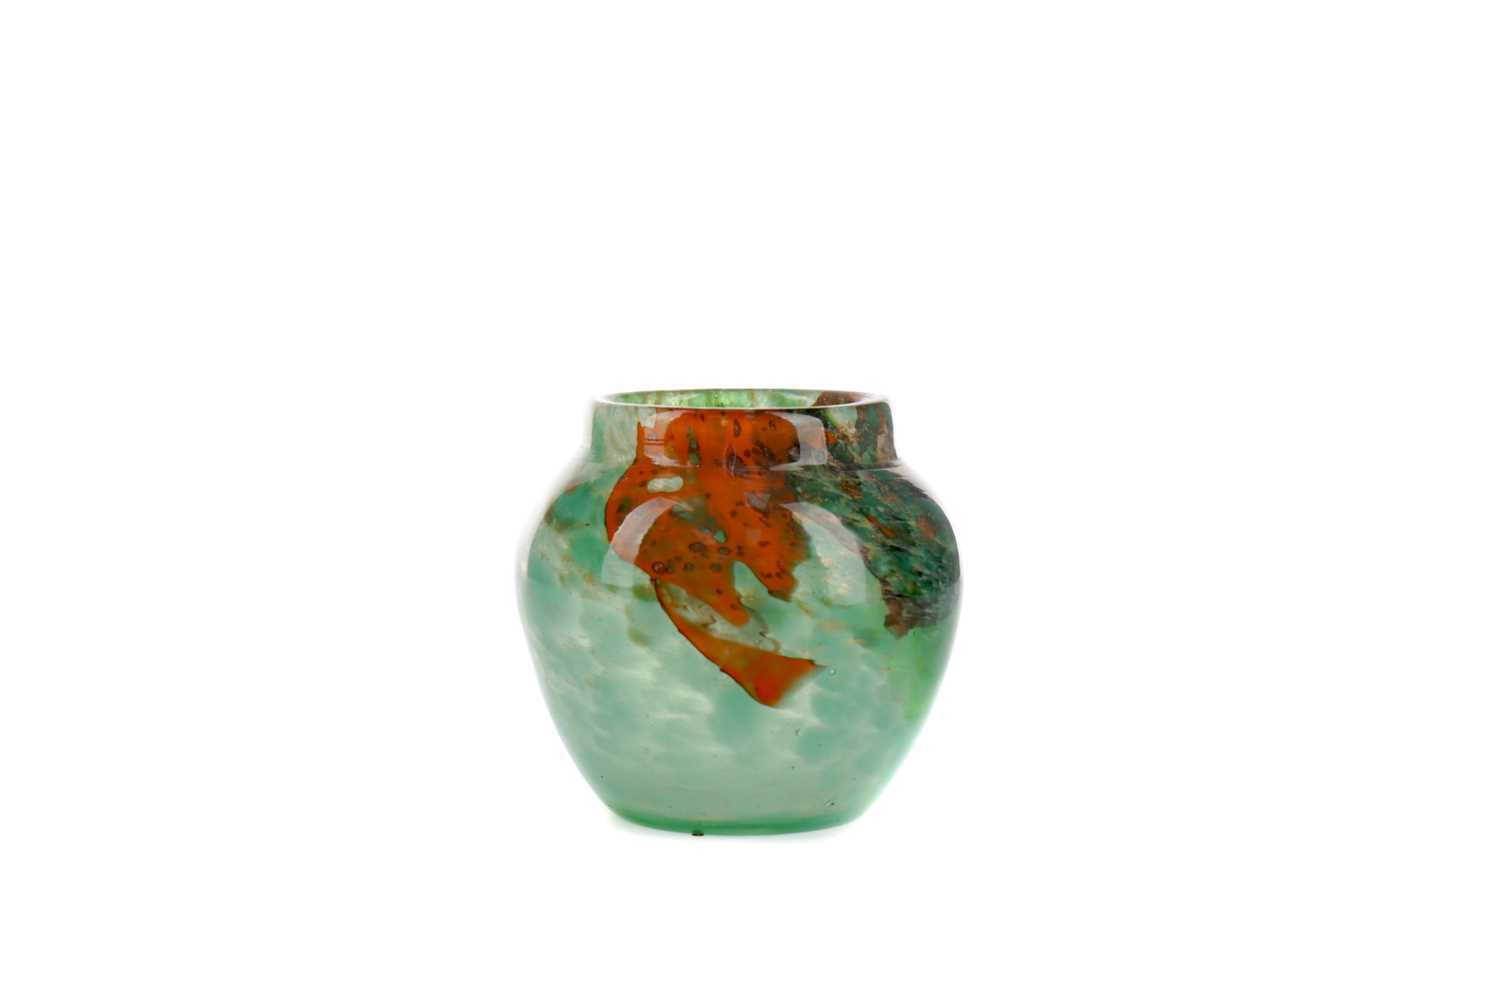 Lot 1006 - AN EARLY 20TH CENTURY MONART GLASS VASE